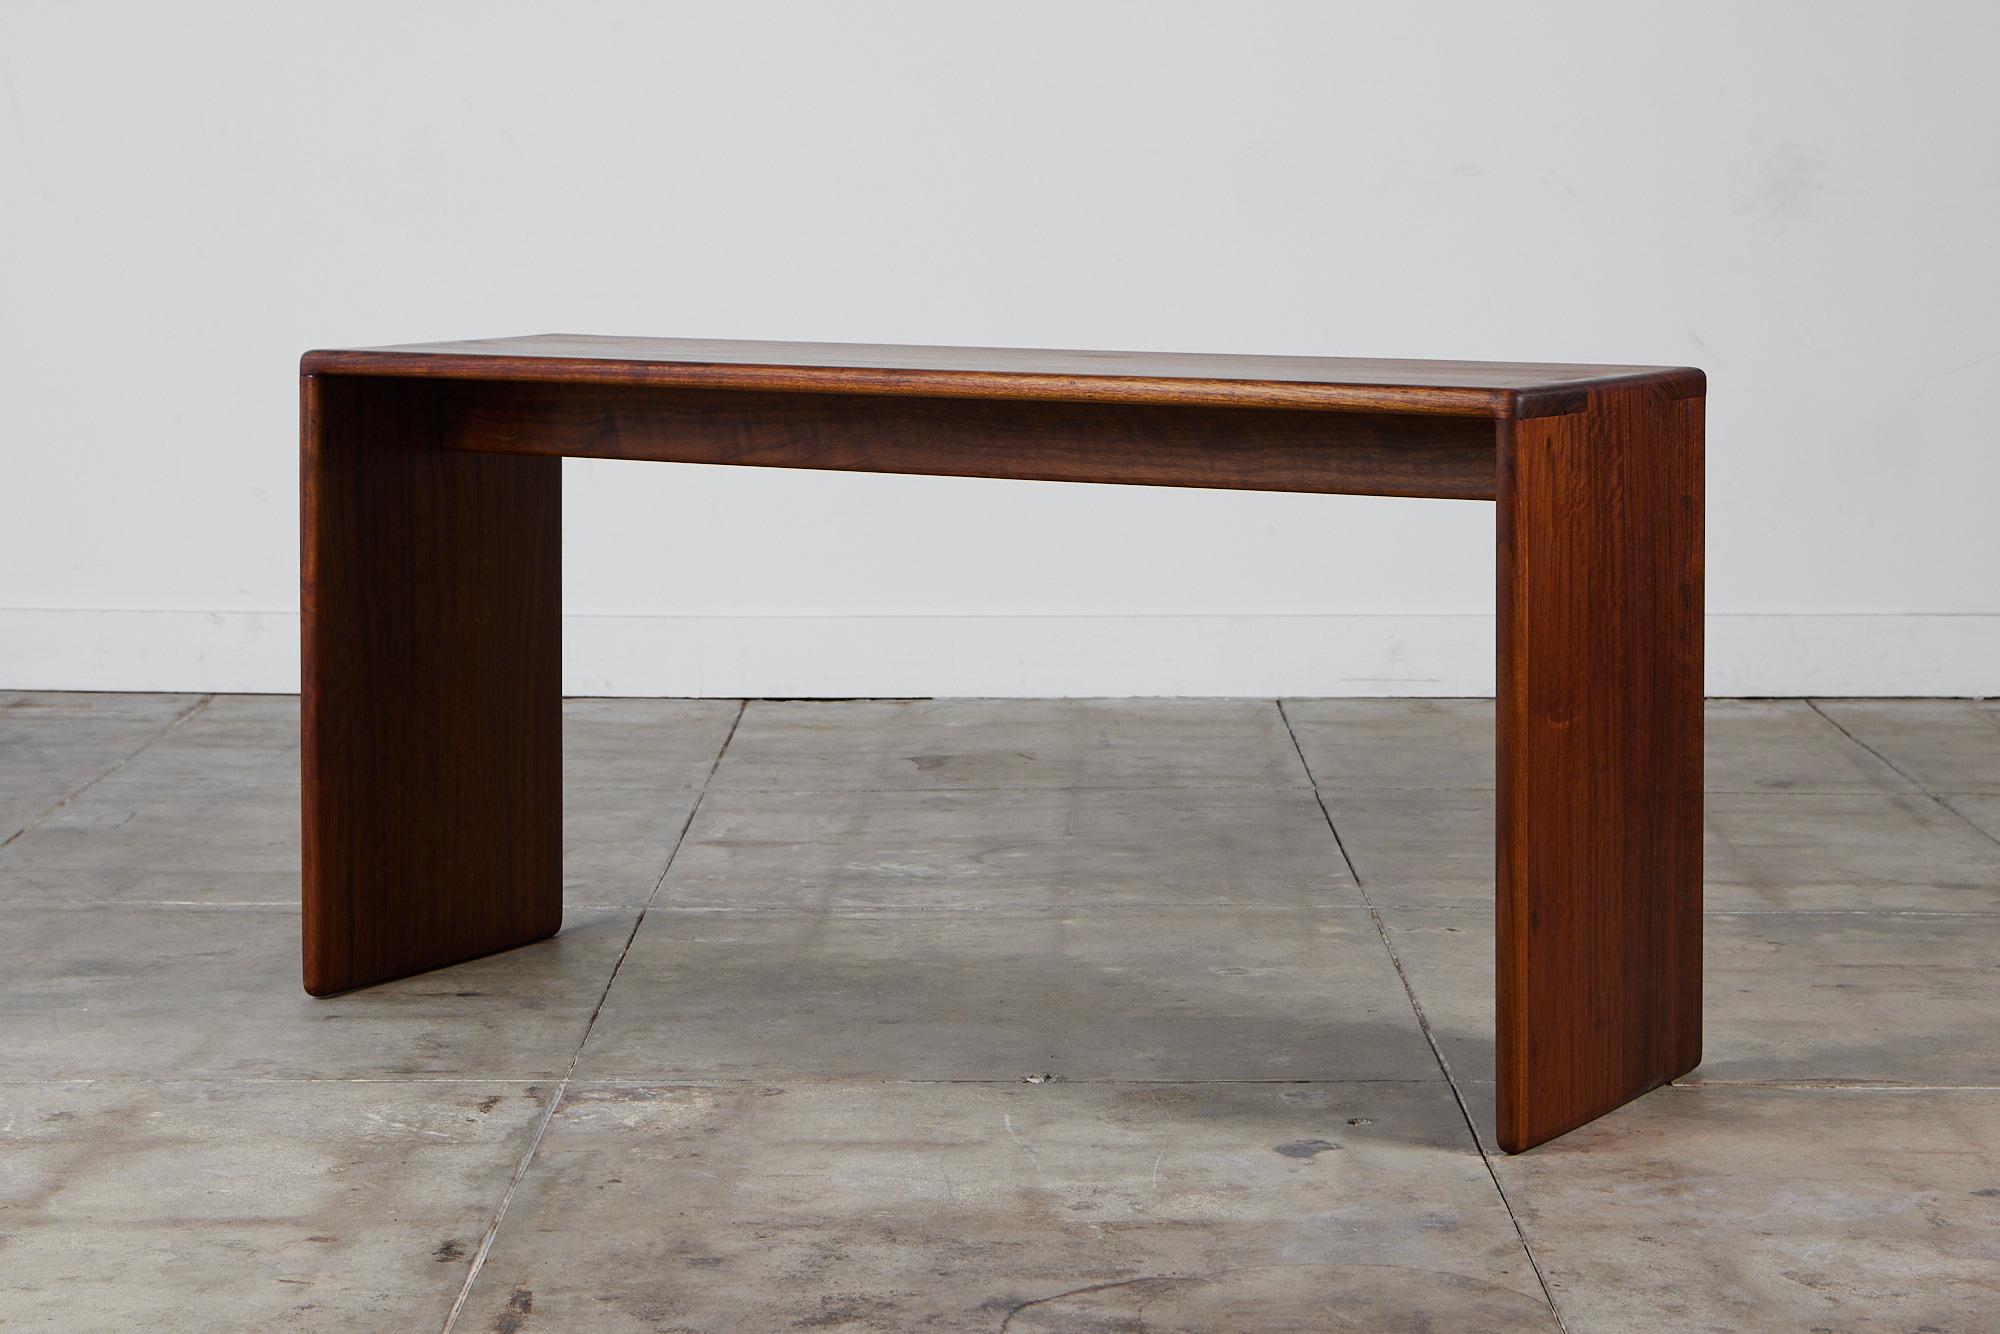 An American made console table, c.1970s, by Gerald McCabe is beautifully crafted from Shedua, also known as African Walnut. This piece features natural wood grain variances that cascade down the sides of the console. This piece would be perfect in